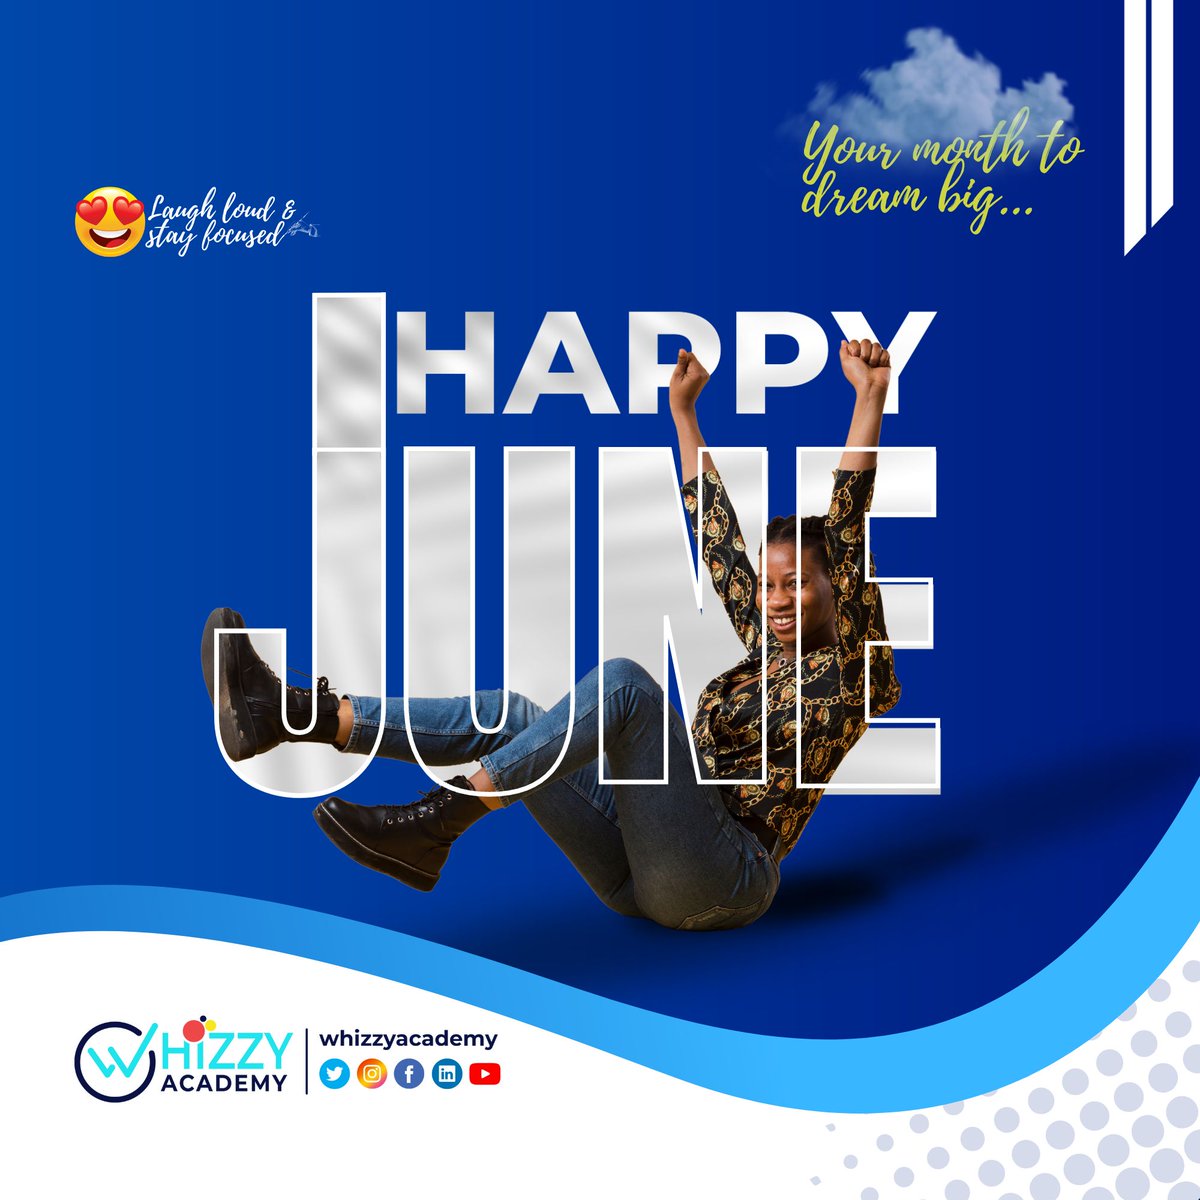 It's a new month and Whizzy Academy wishes you all a happy new month 🥰

#whizzyacademy #happynewmonth #june2023 #digitaltraining #monthoflove #HappyPrideMonth